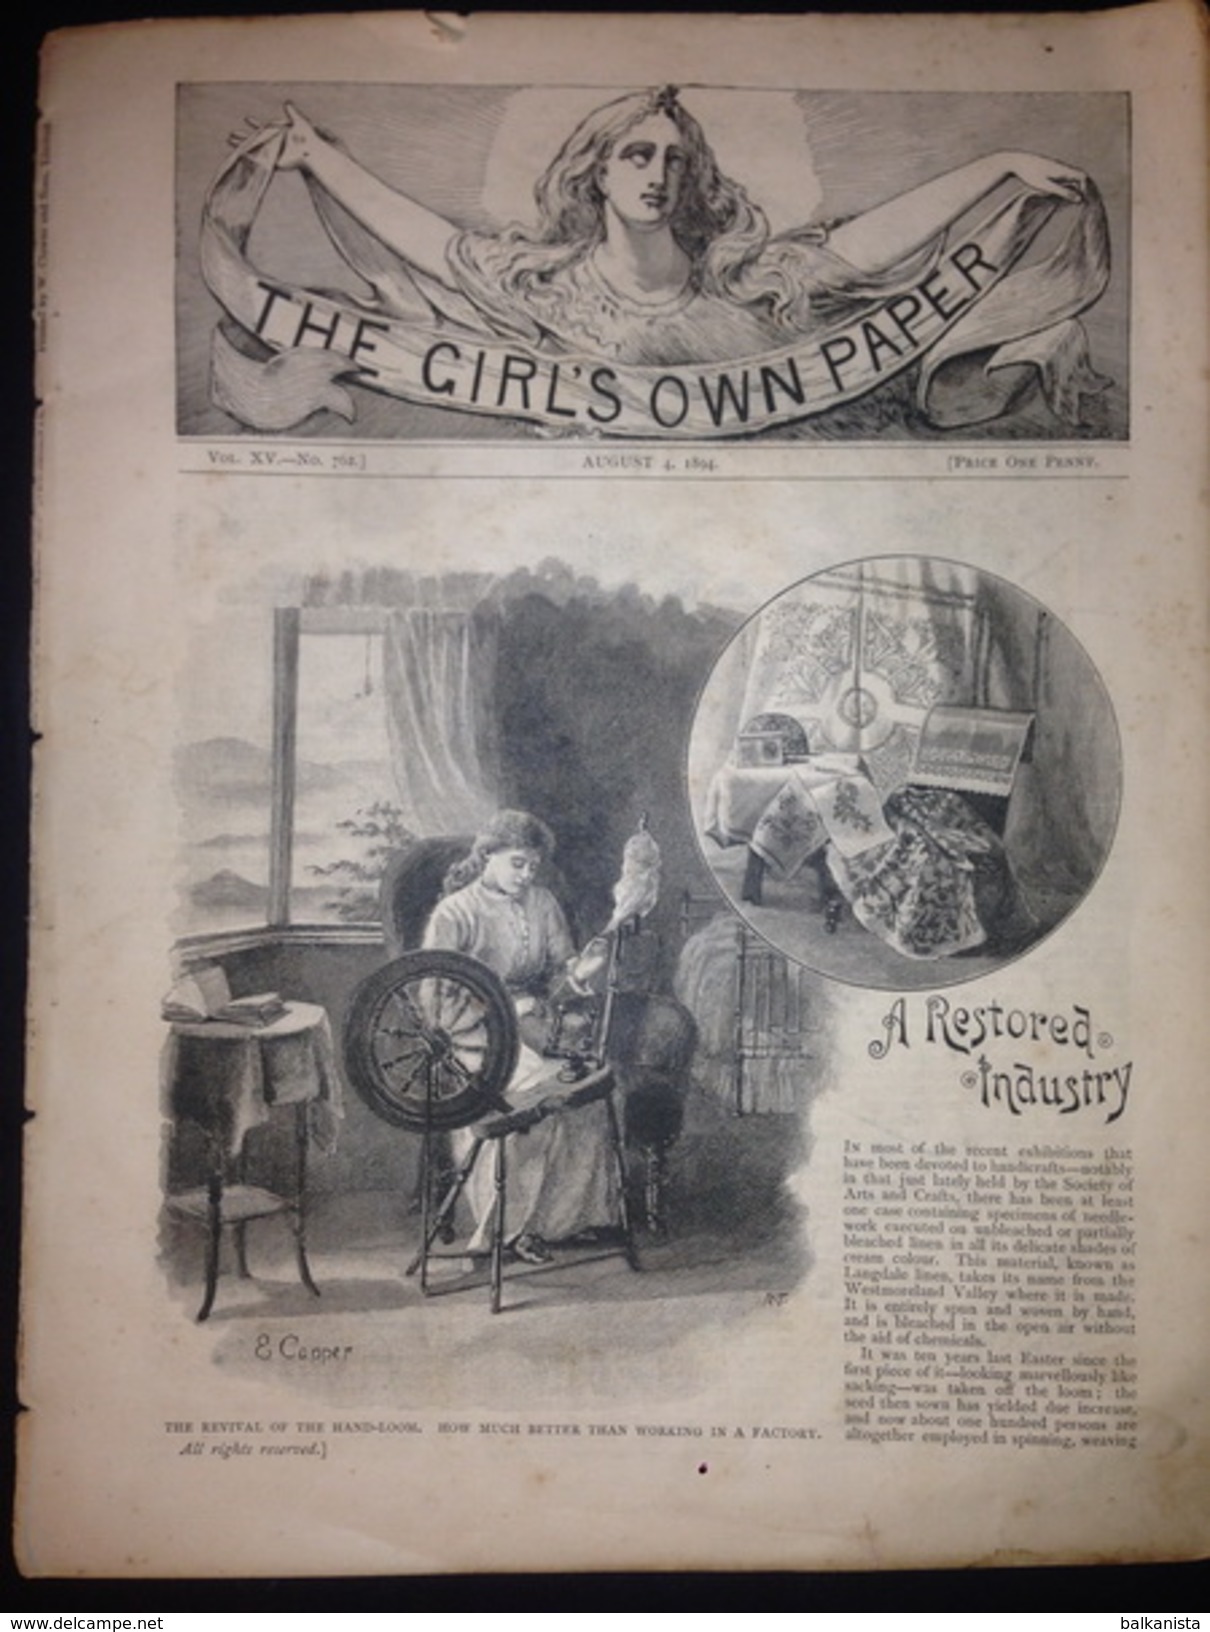 The Girl's Own Paper August 4, 1894 No: 762 - Frauen